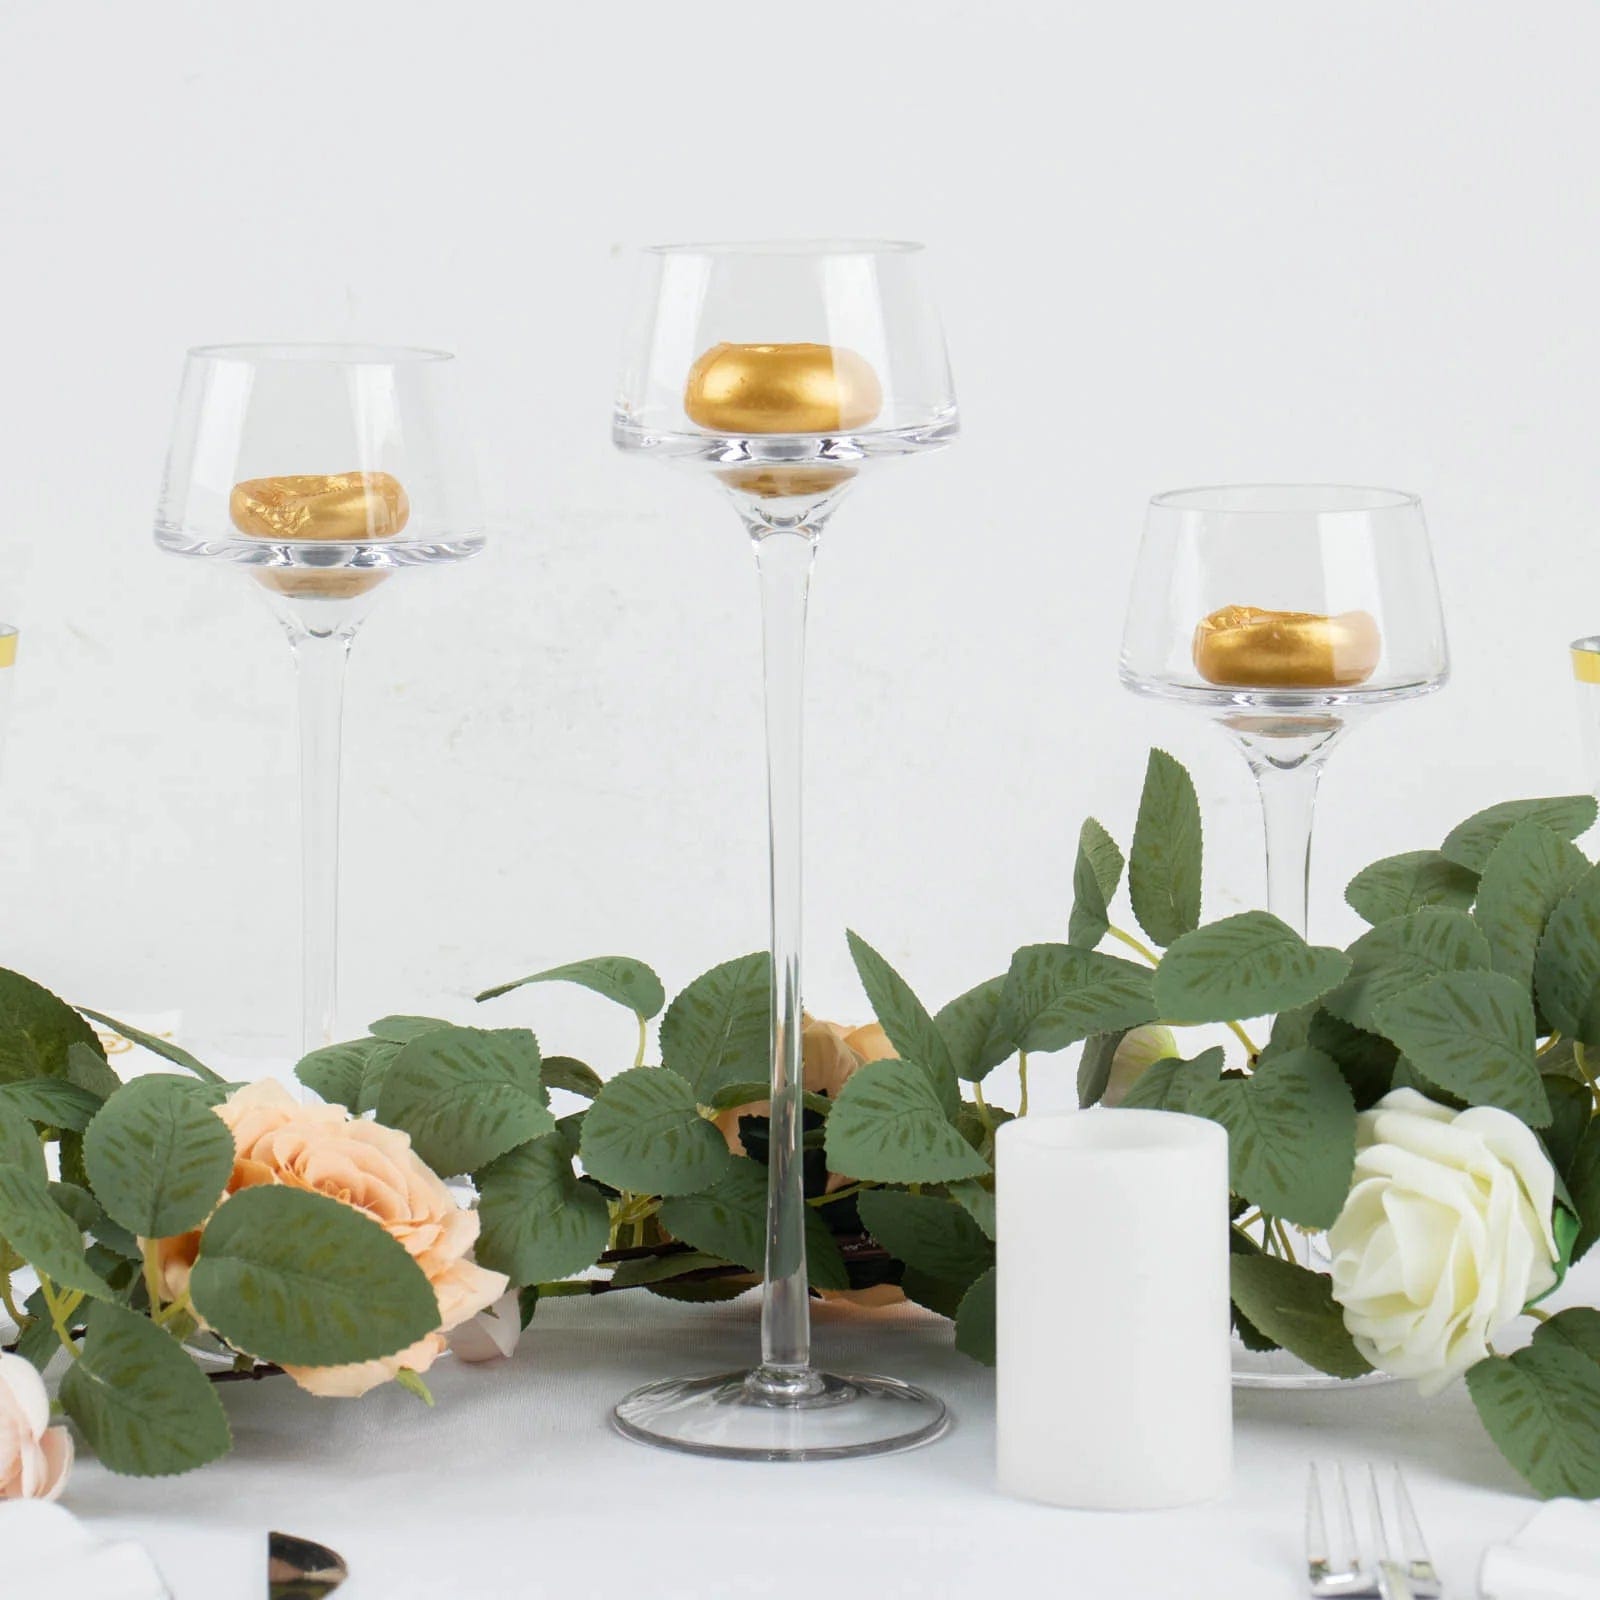 3 Crystal Clear Long Stem Glass Candle Holders Vases